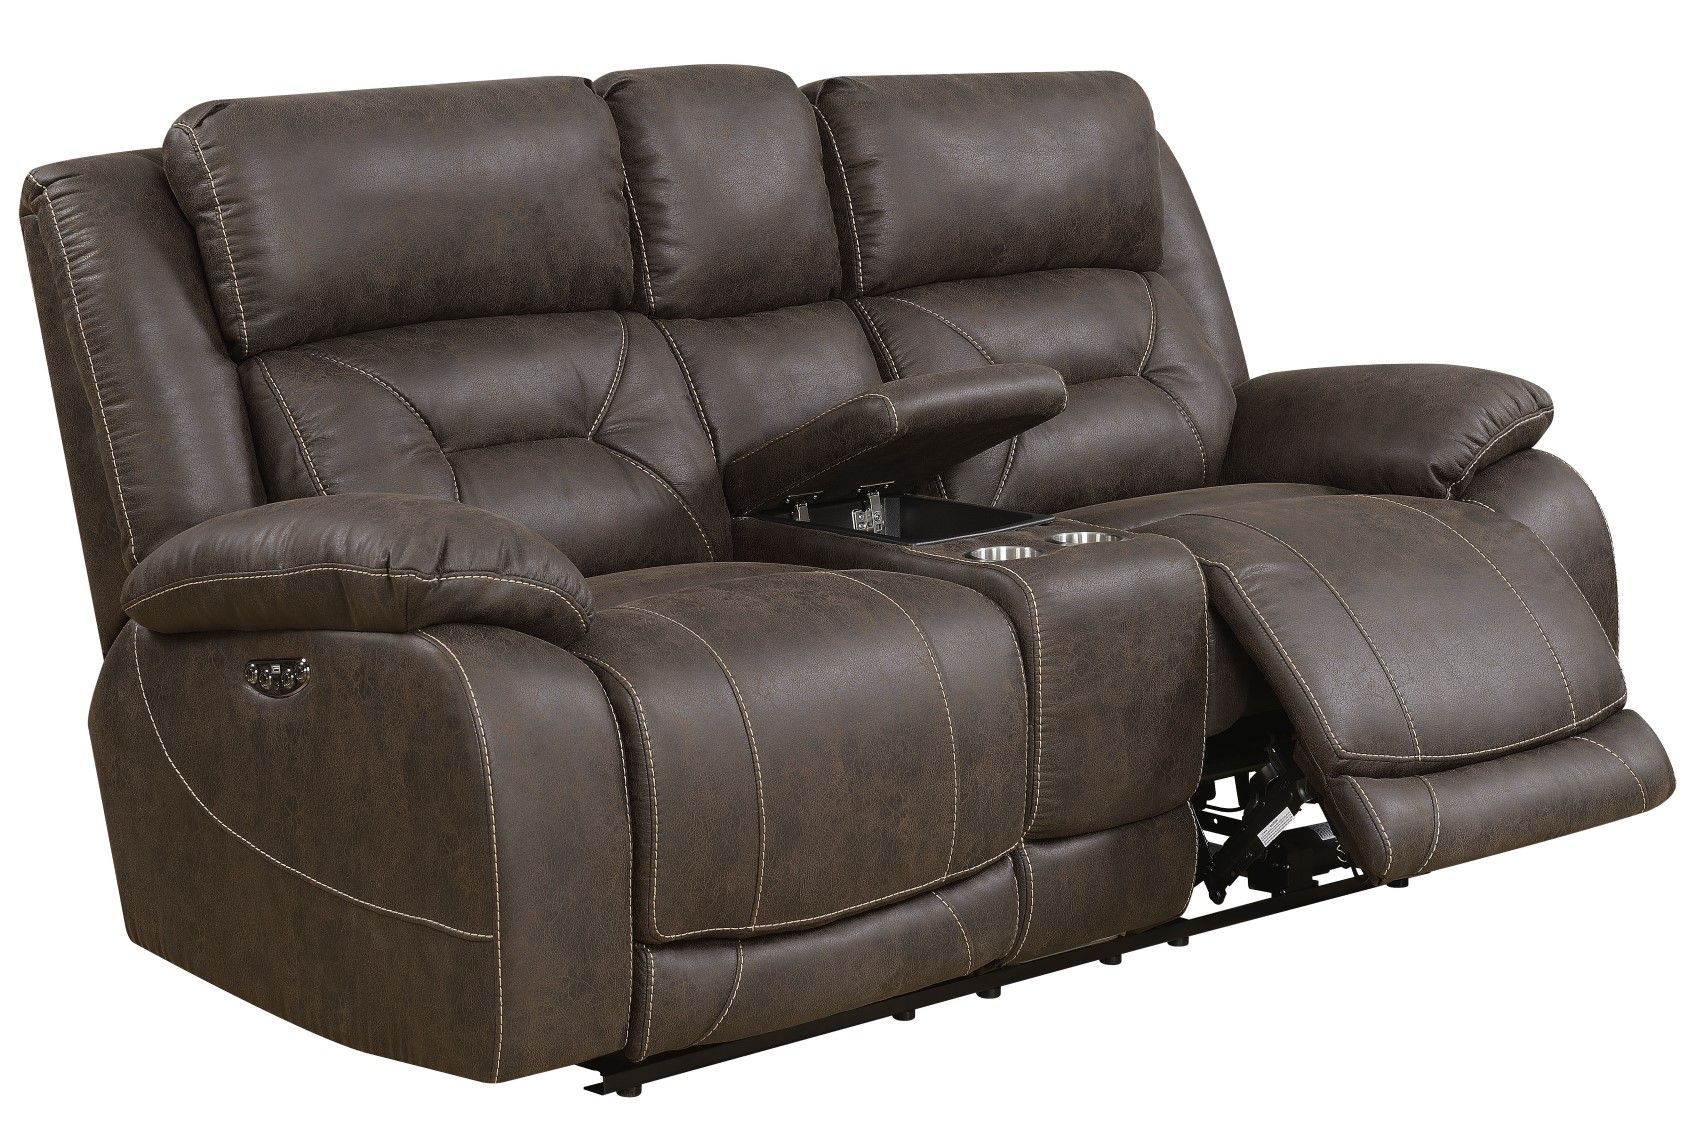 Aria Power Recliner Sofa Set With Power Head Rest In Pertaining To Expedition Brown Power Reclining Sofas (View 2 of 15)